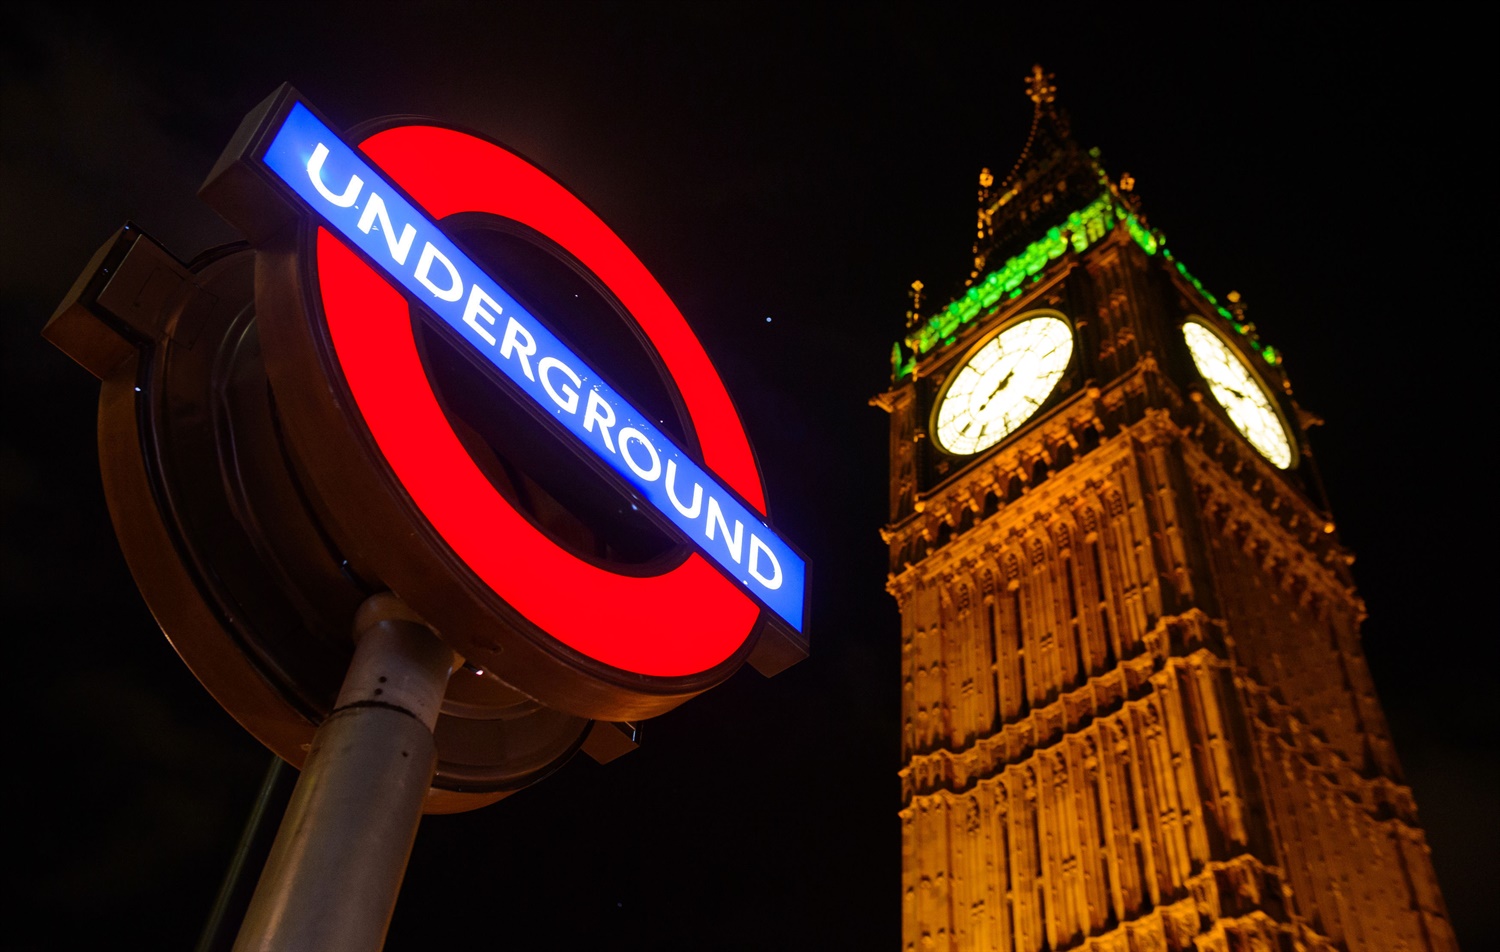 RMT to ballot Piccadilly Line drivers over ‘wholesale relations breakdown’